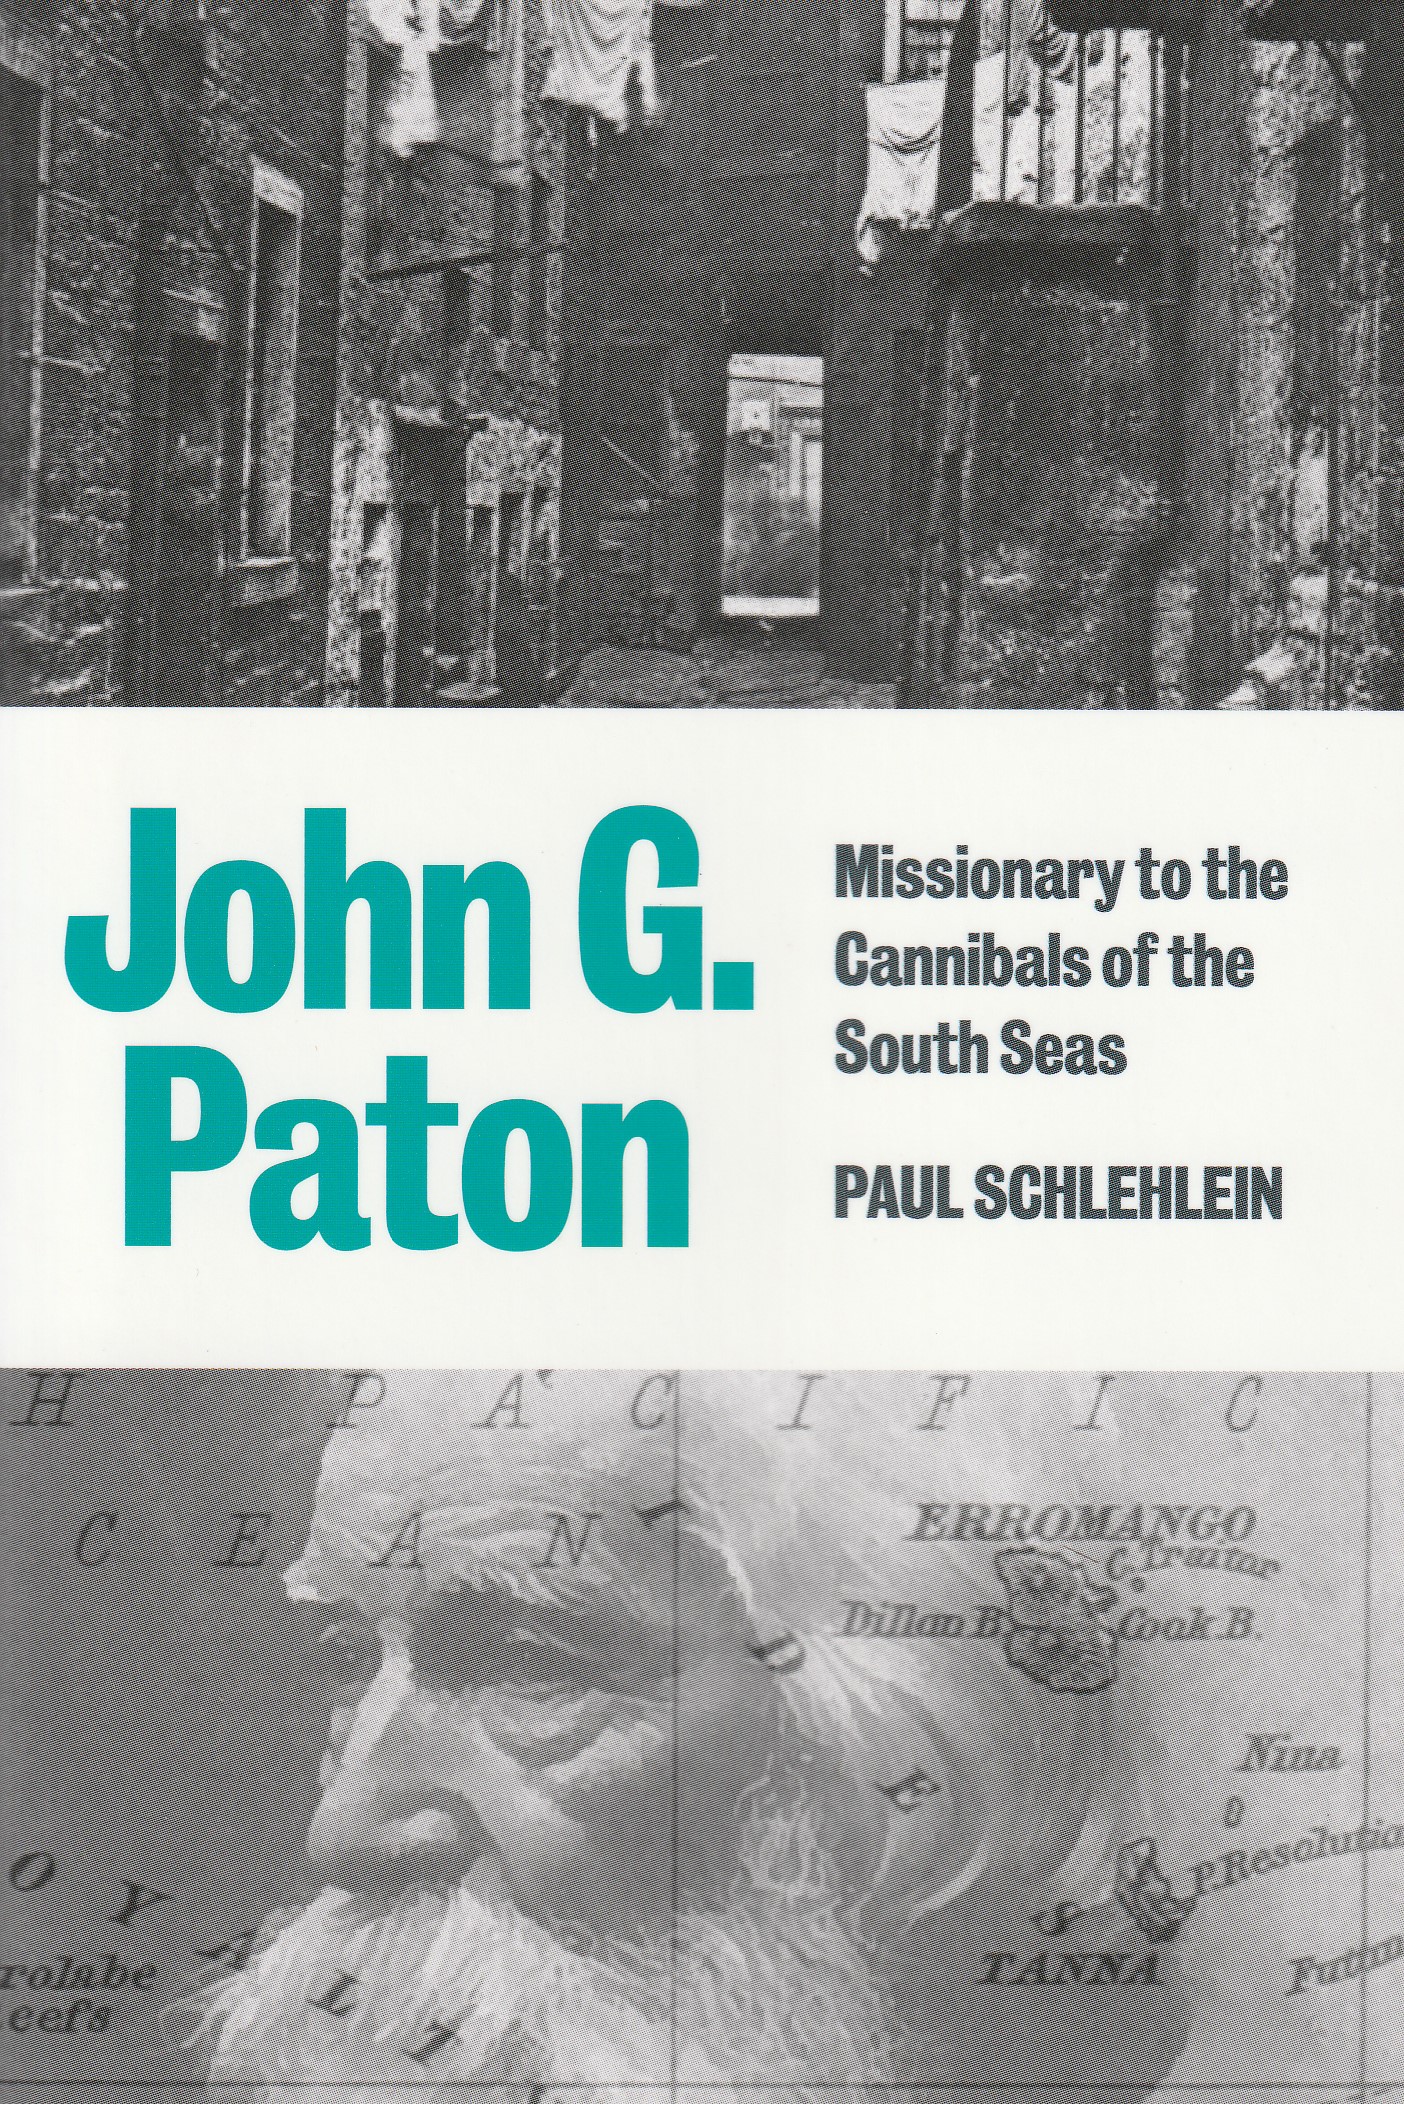 John G. Paton: Missionary to the Cannibals of the South Seas